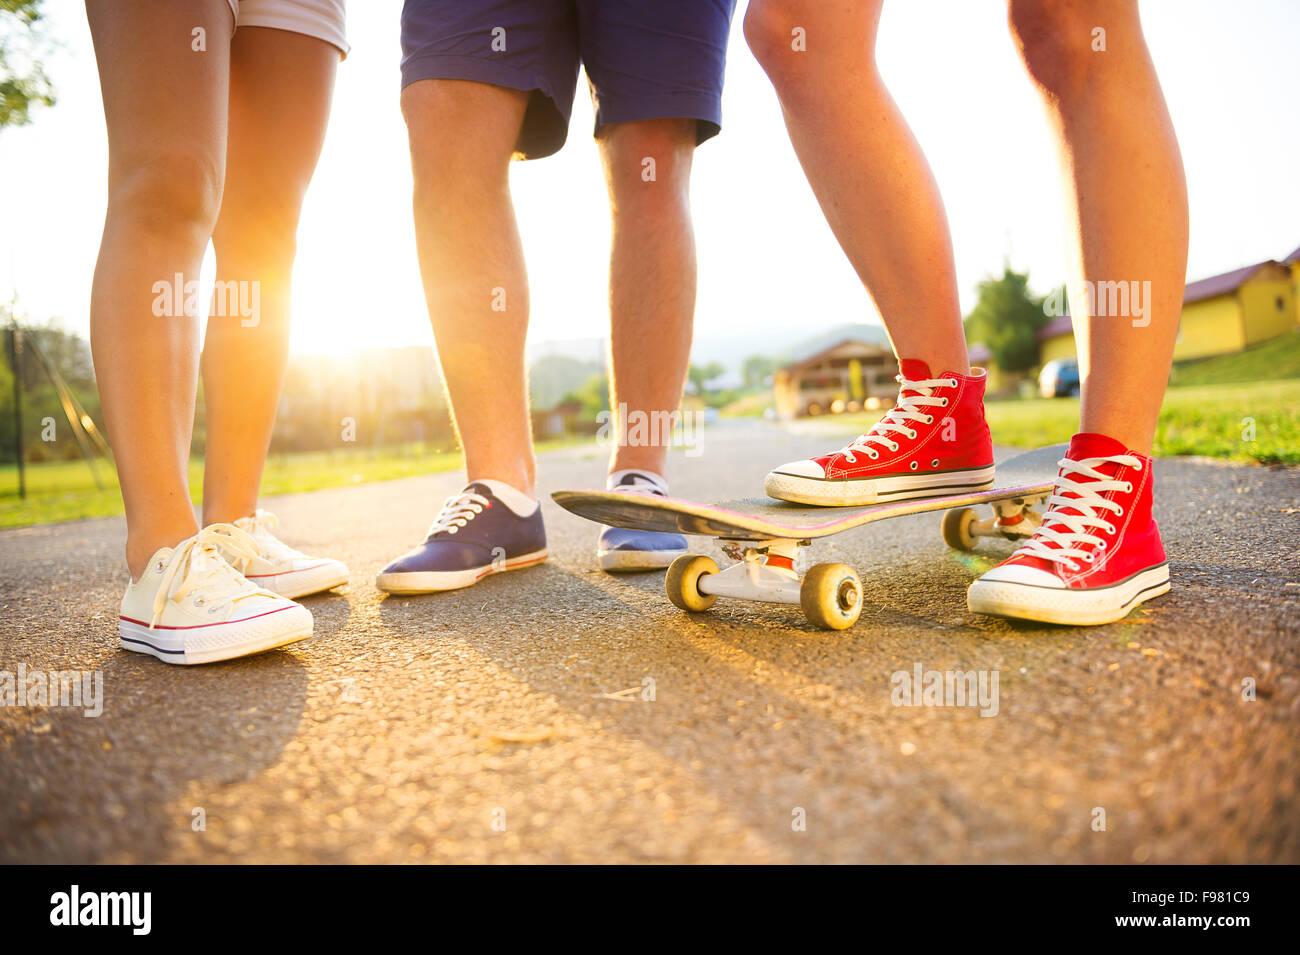 Closeup of legs and sneakers of young people on skateboard Stock Photo